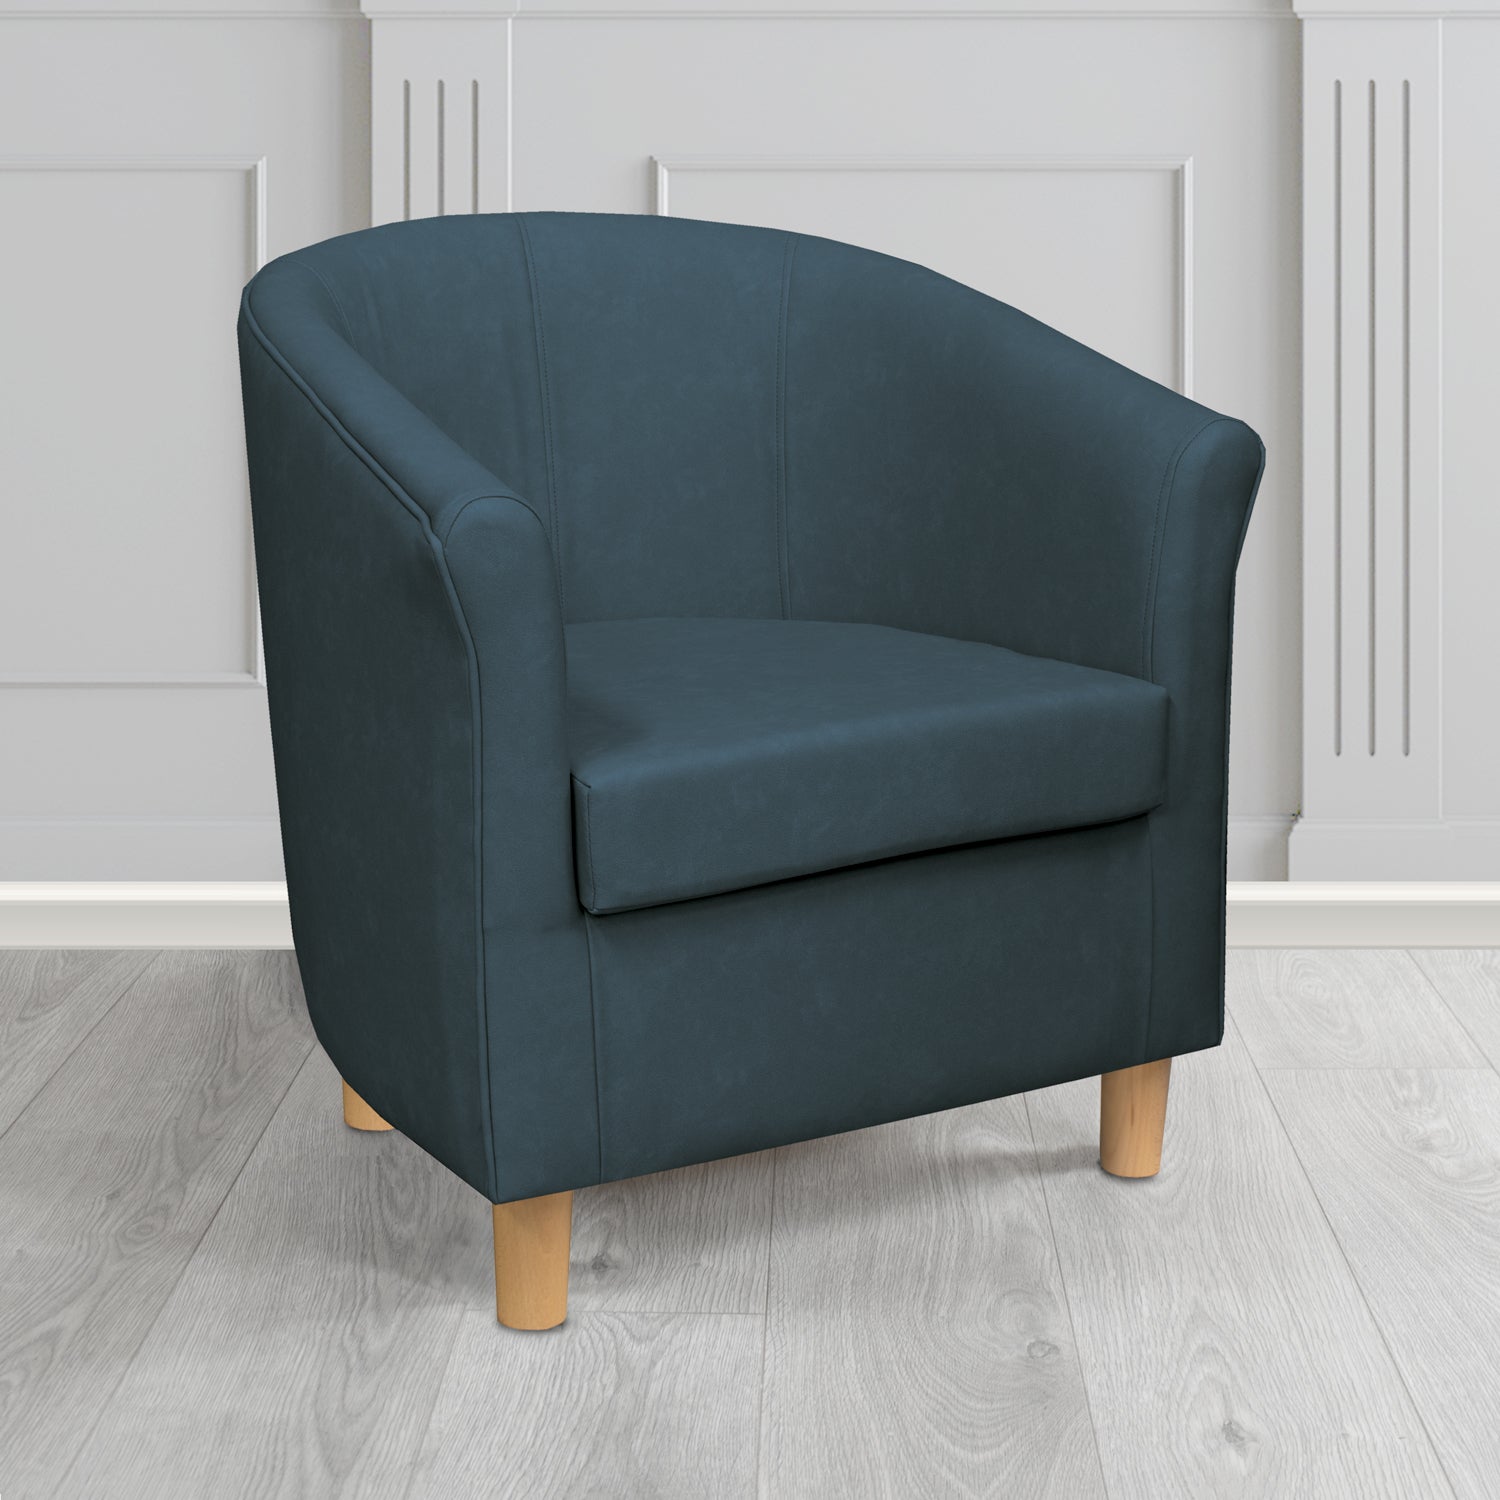 Tuscany Tub Chair in Infiniti Sapphire INF1855 Antimicrobial Crib 5 Faux Leather - The Tub Chair Shop